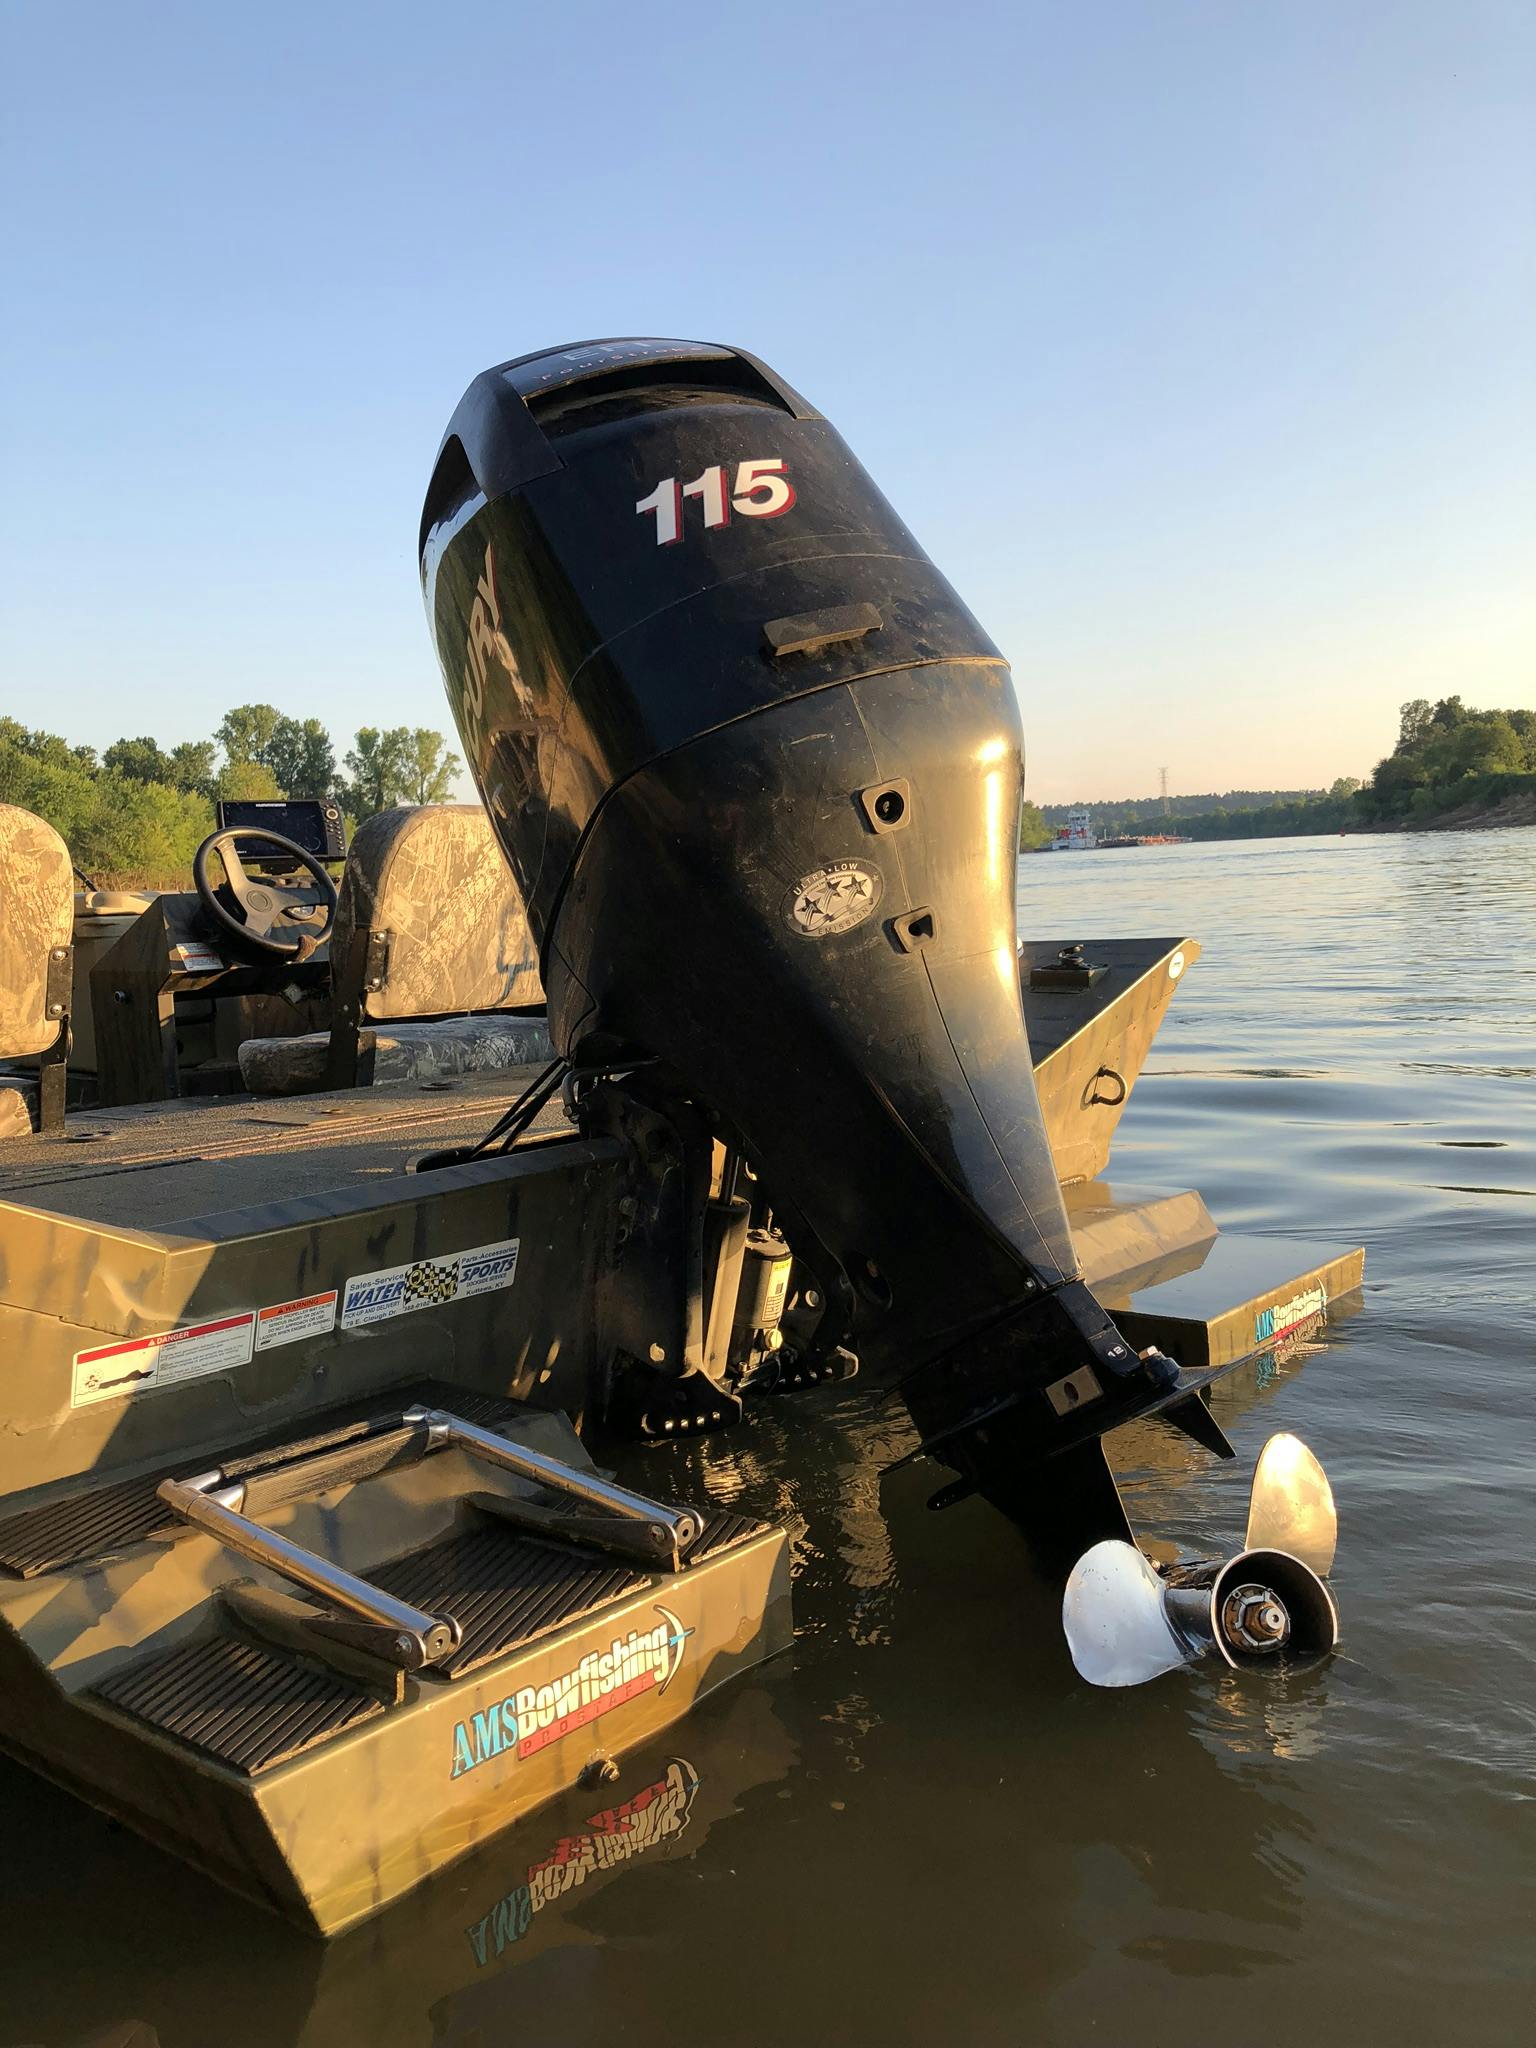 24' SeaArk used by Loveless Outdoor Adventures to take customers on guided bowfishing trips.